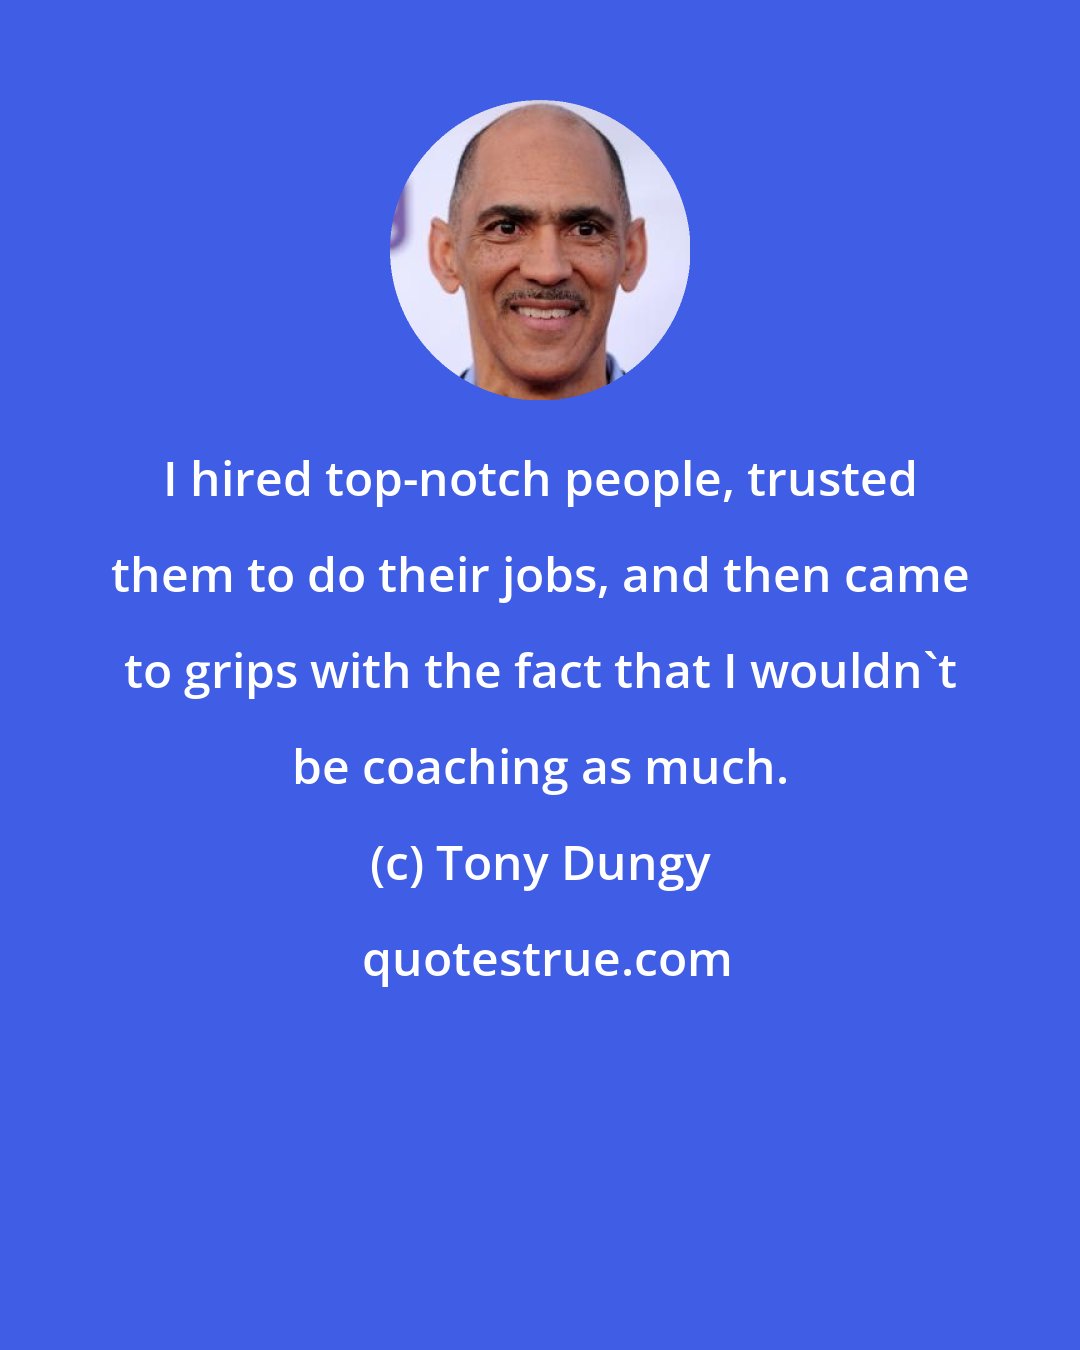 Tony Dungy: I hired top-notch people, trusted them to do their jobs, and then came to grips with the fact that I wouldn't be coaching as much.